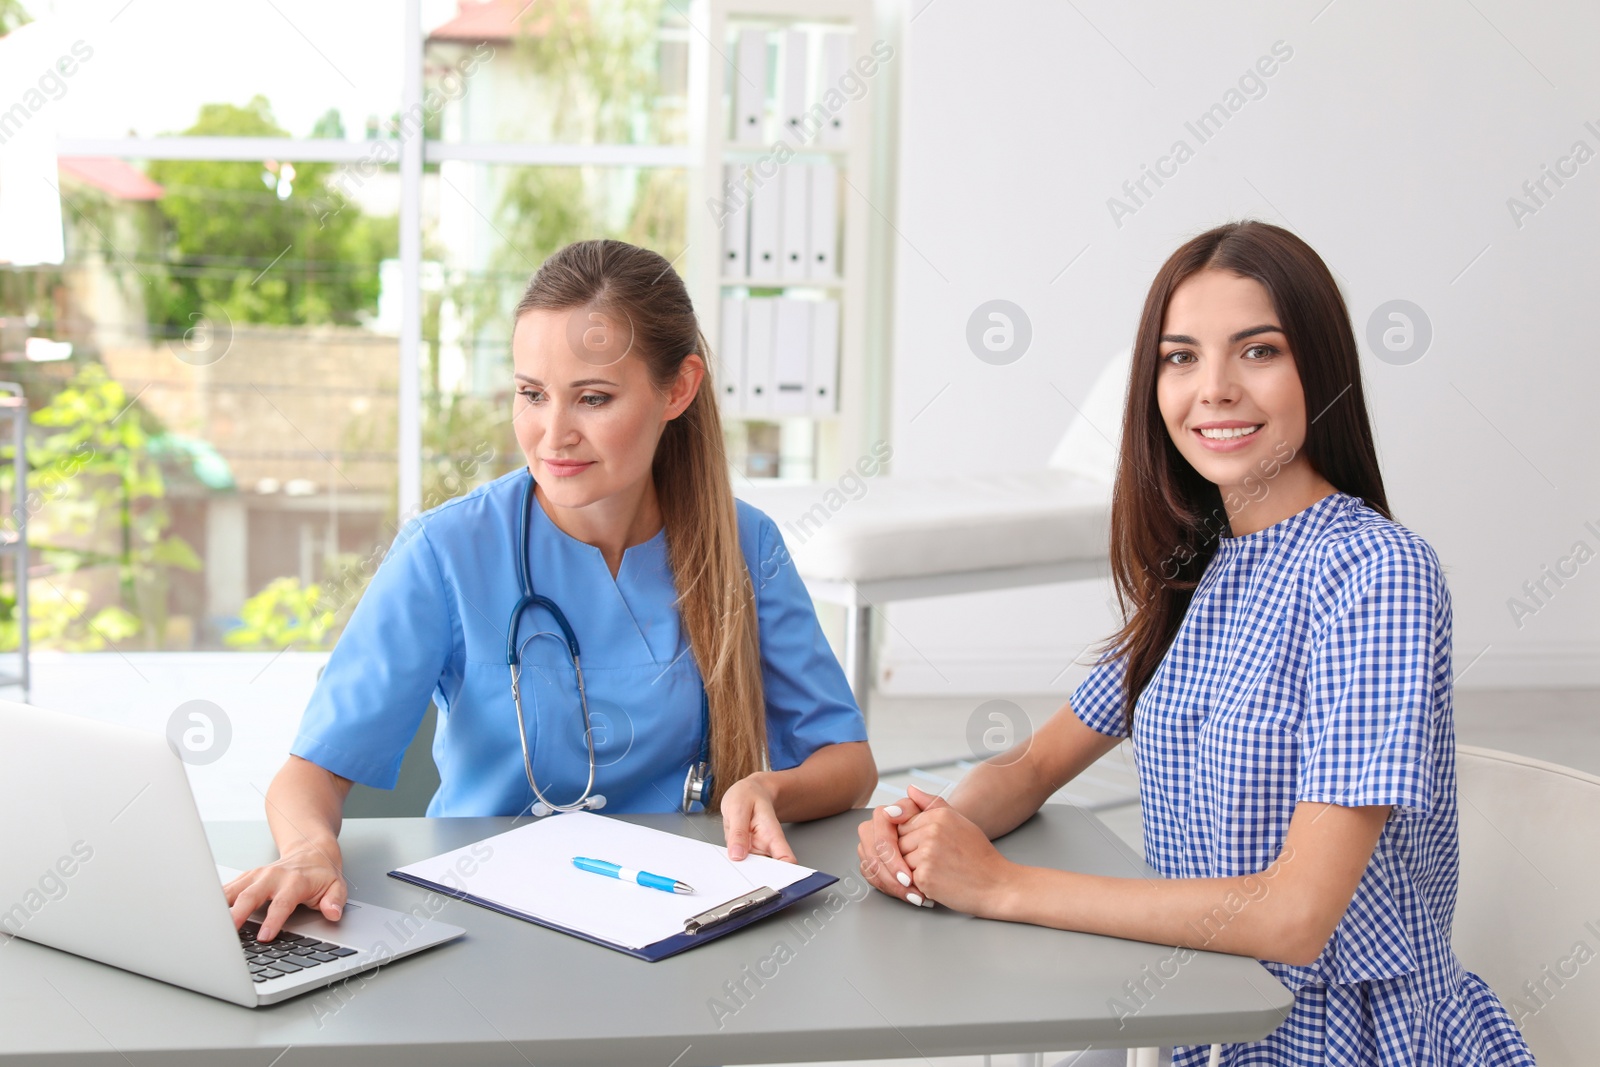 Photo of Patient having appointment with doctor in hospital